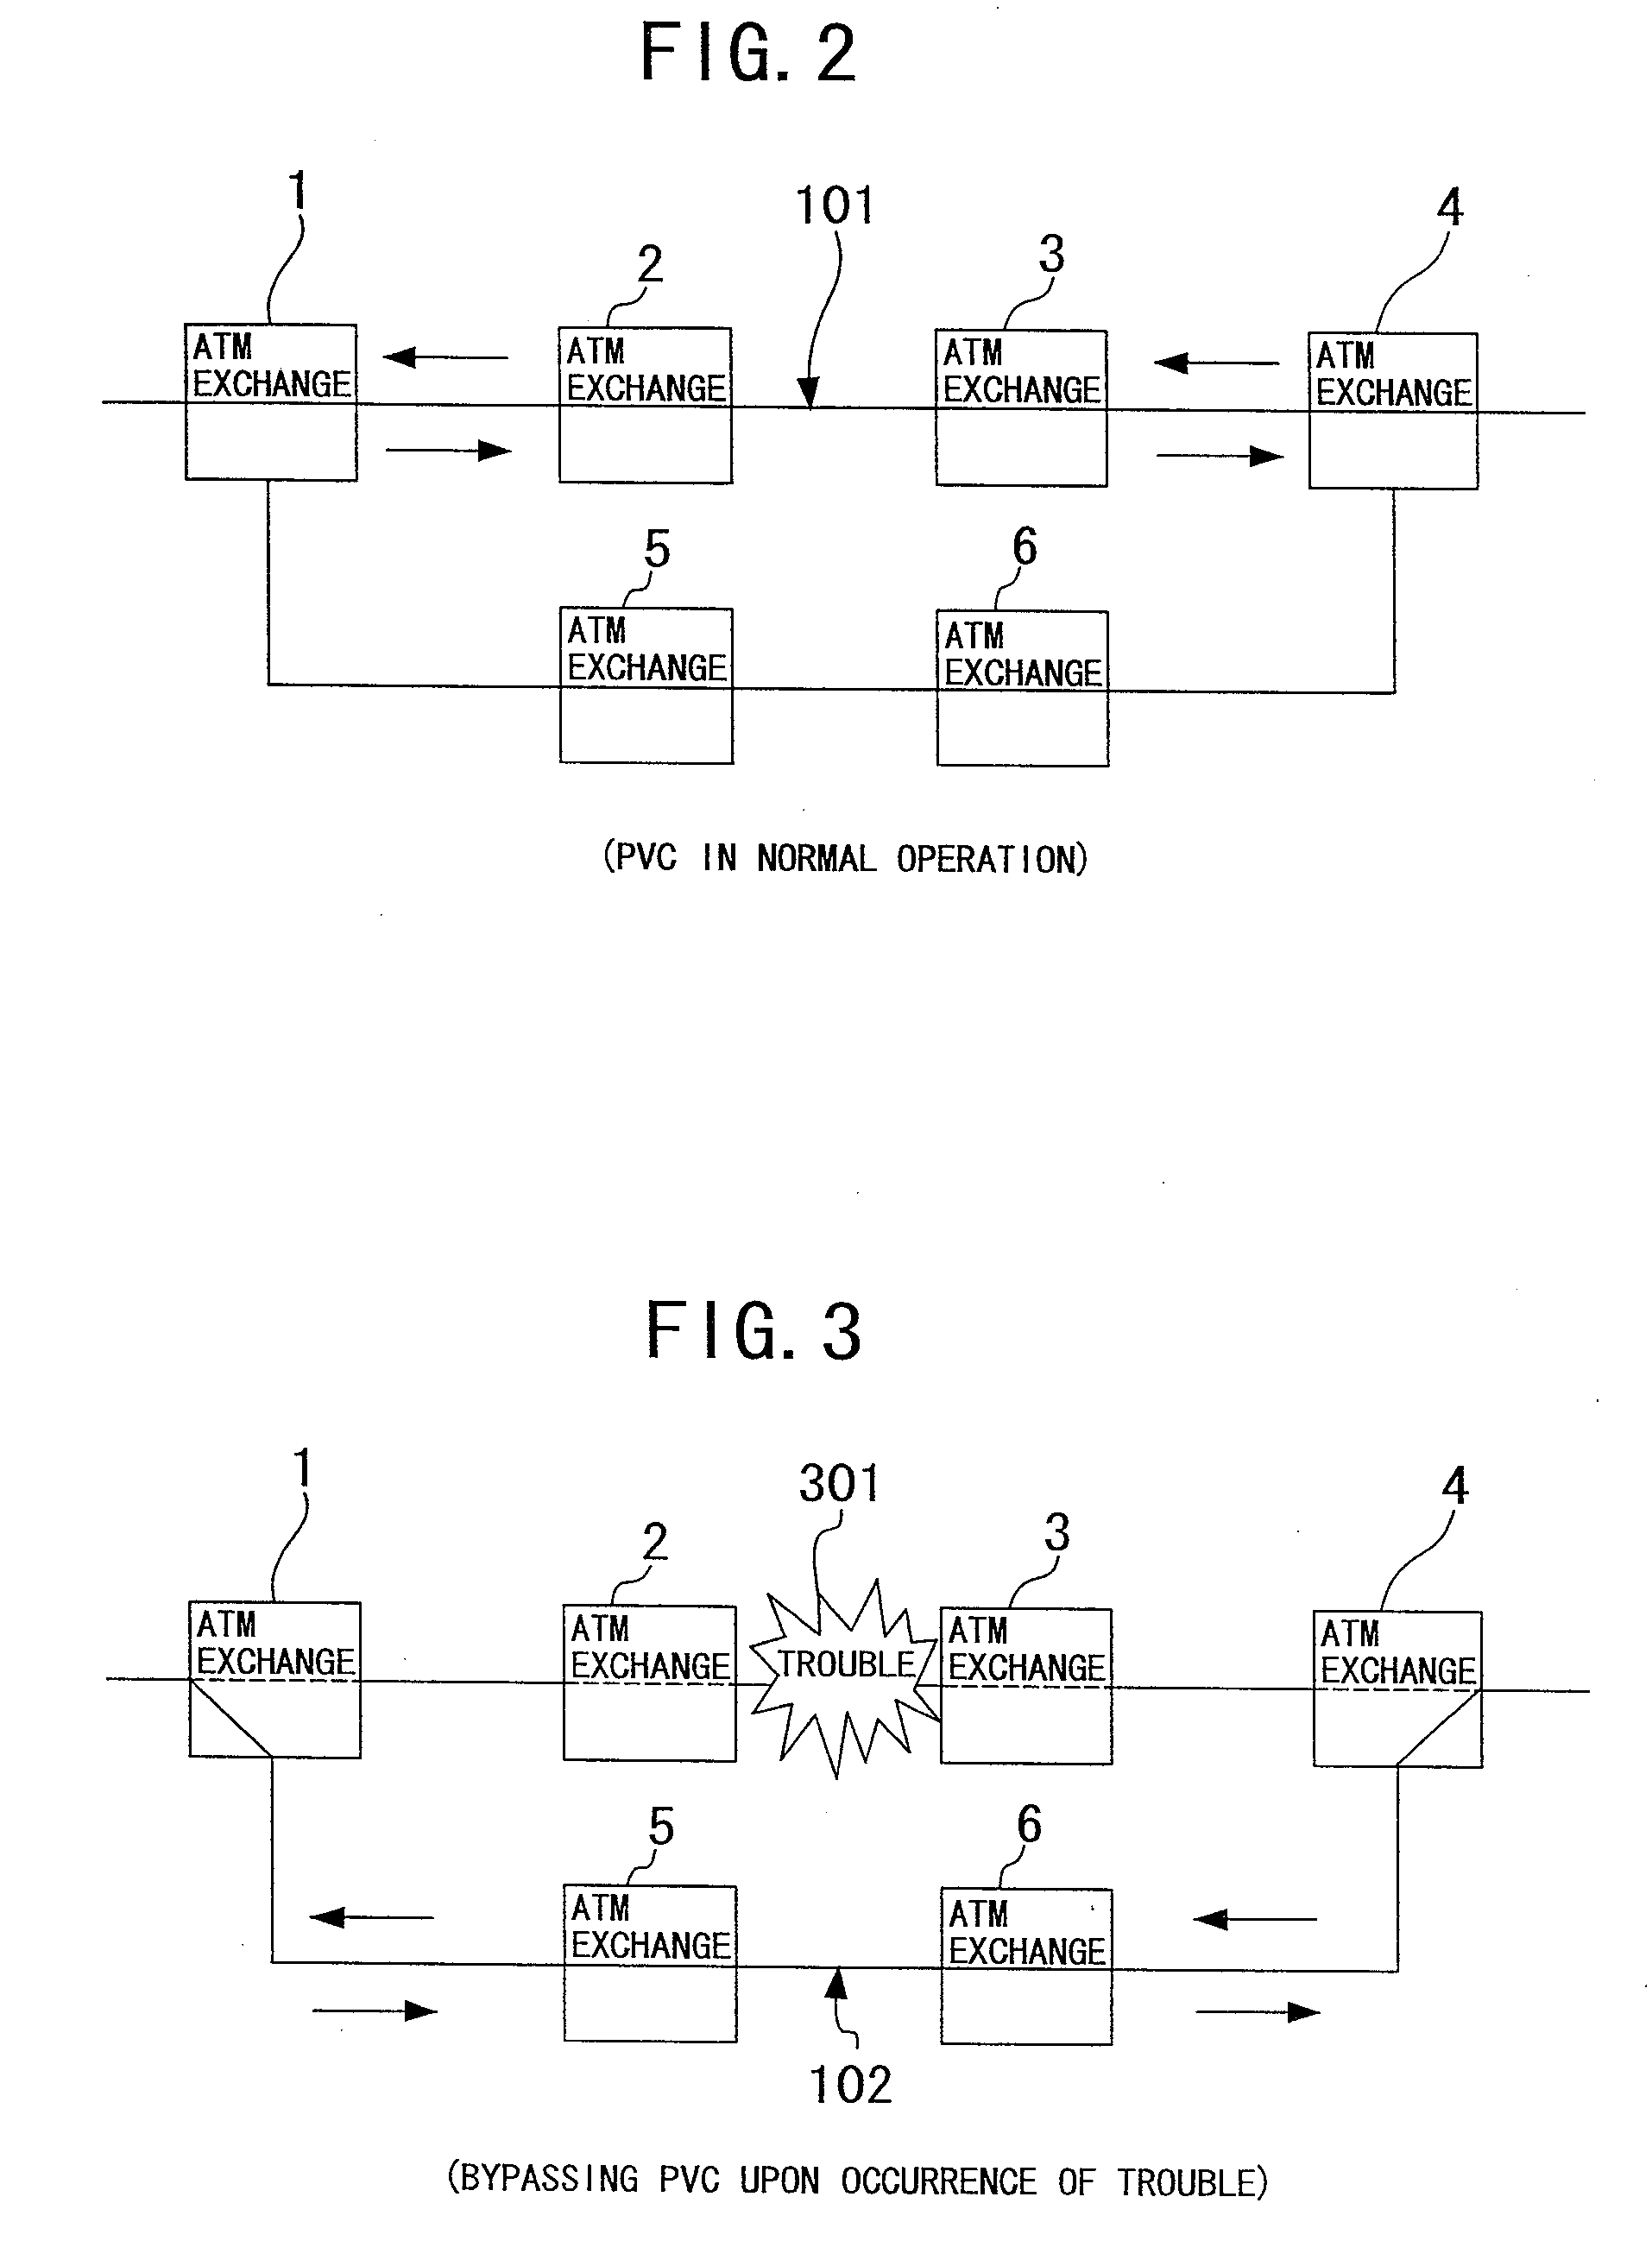 PVC switching control method for ATM communication network